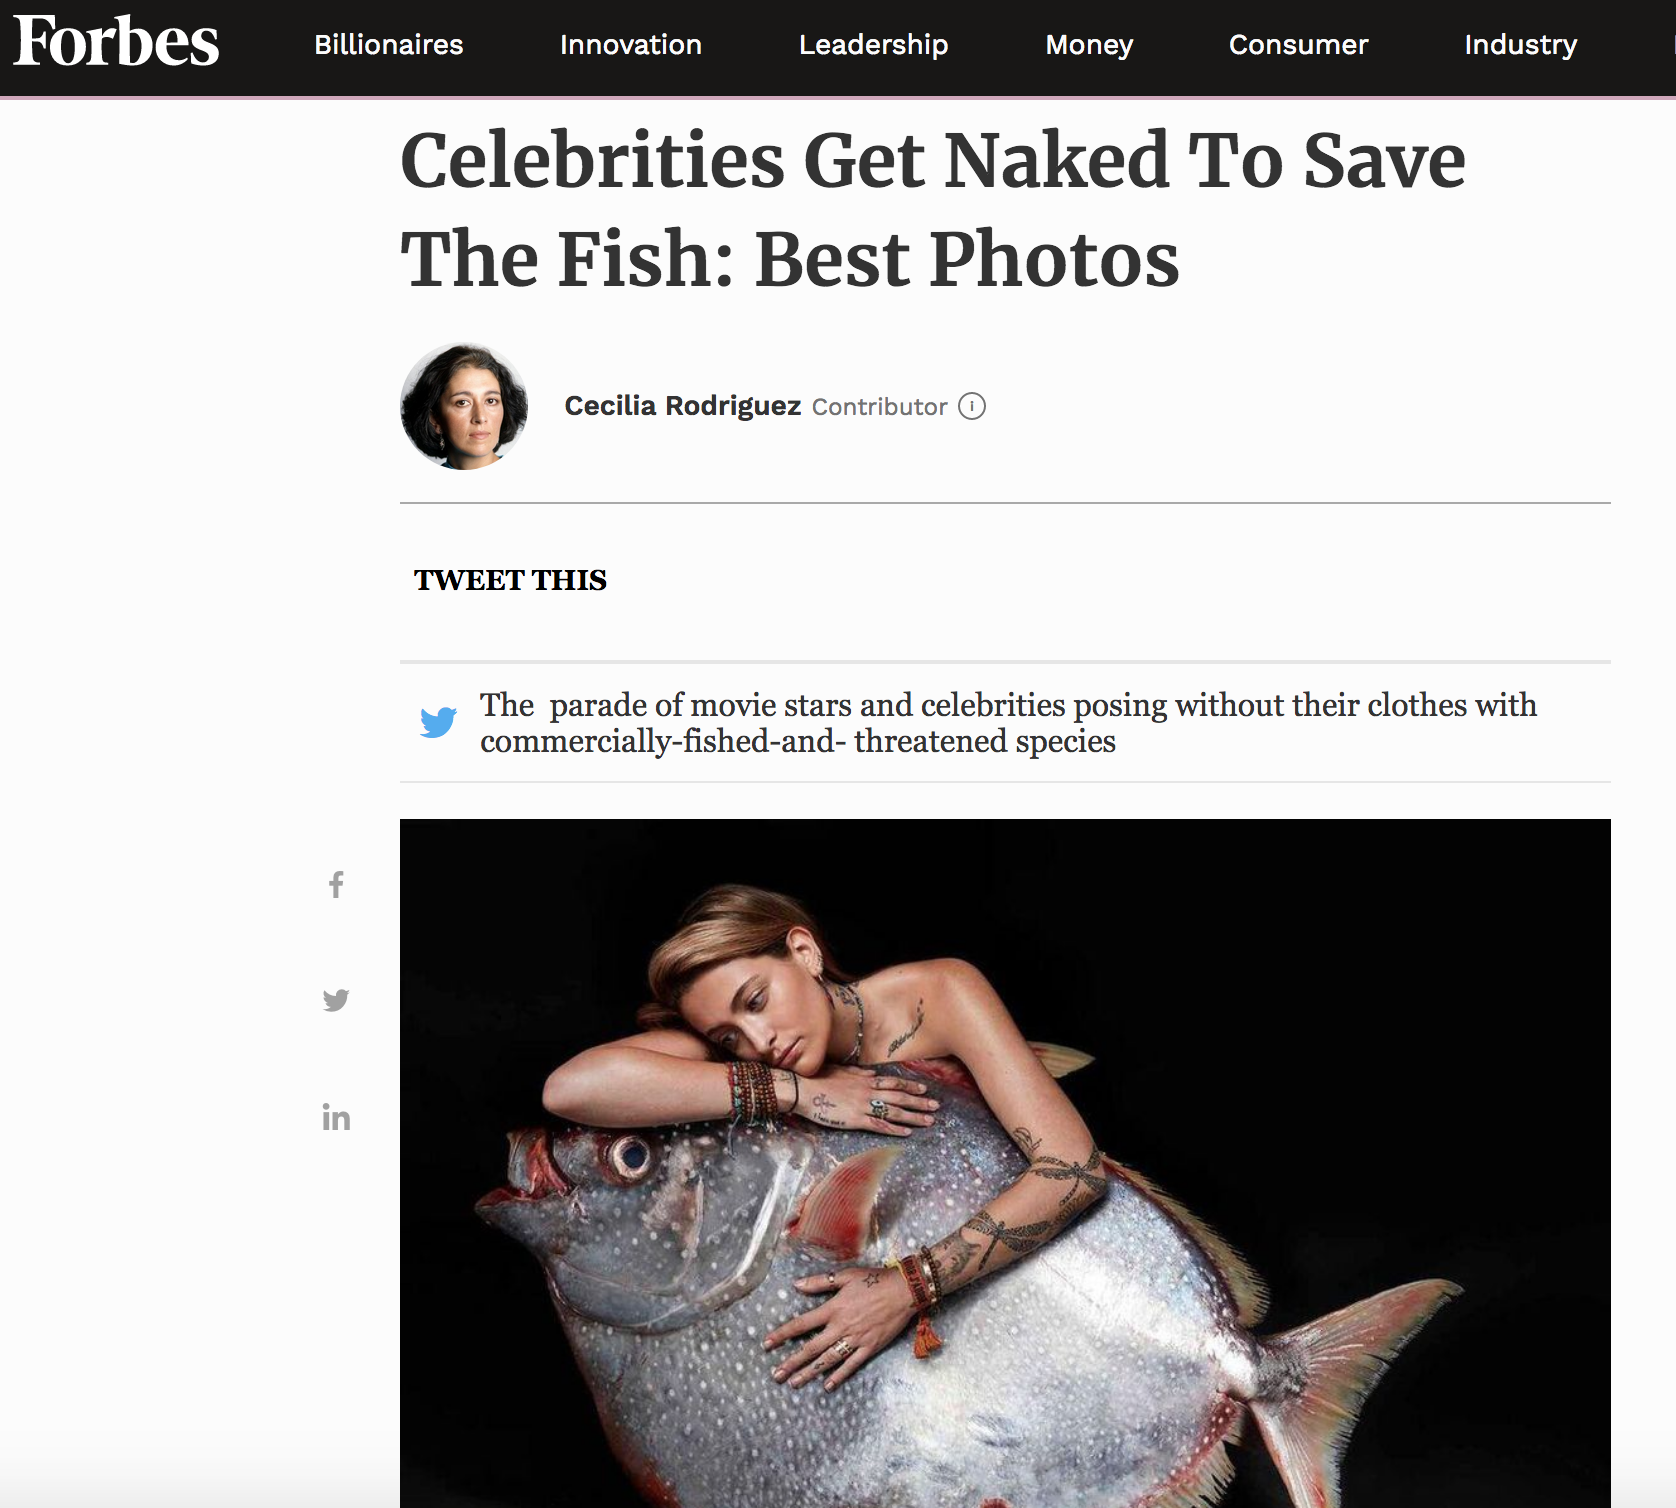 Celebrities Get Naked To Save The Fish: Best Photos